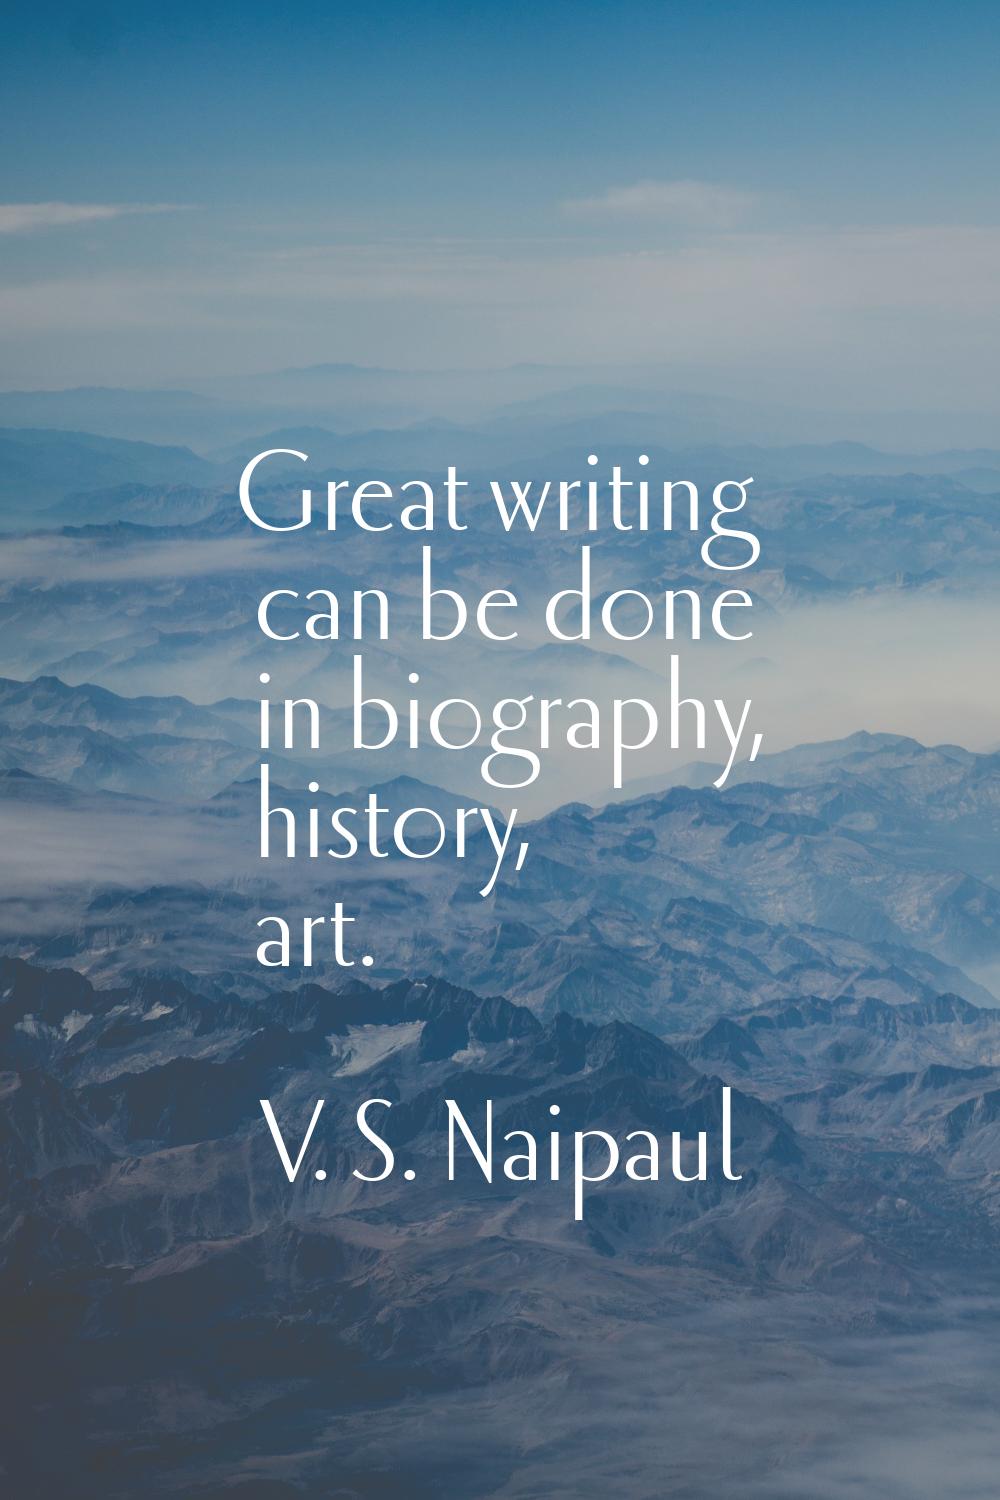 Great writing can be done in biography, history, art.